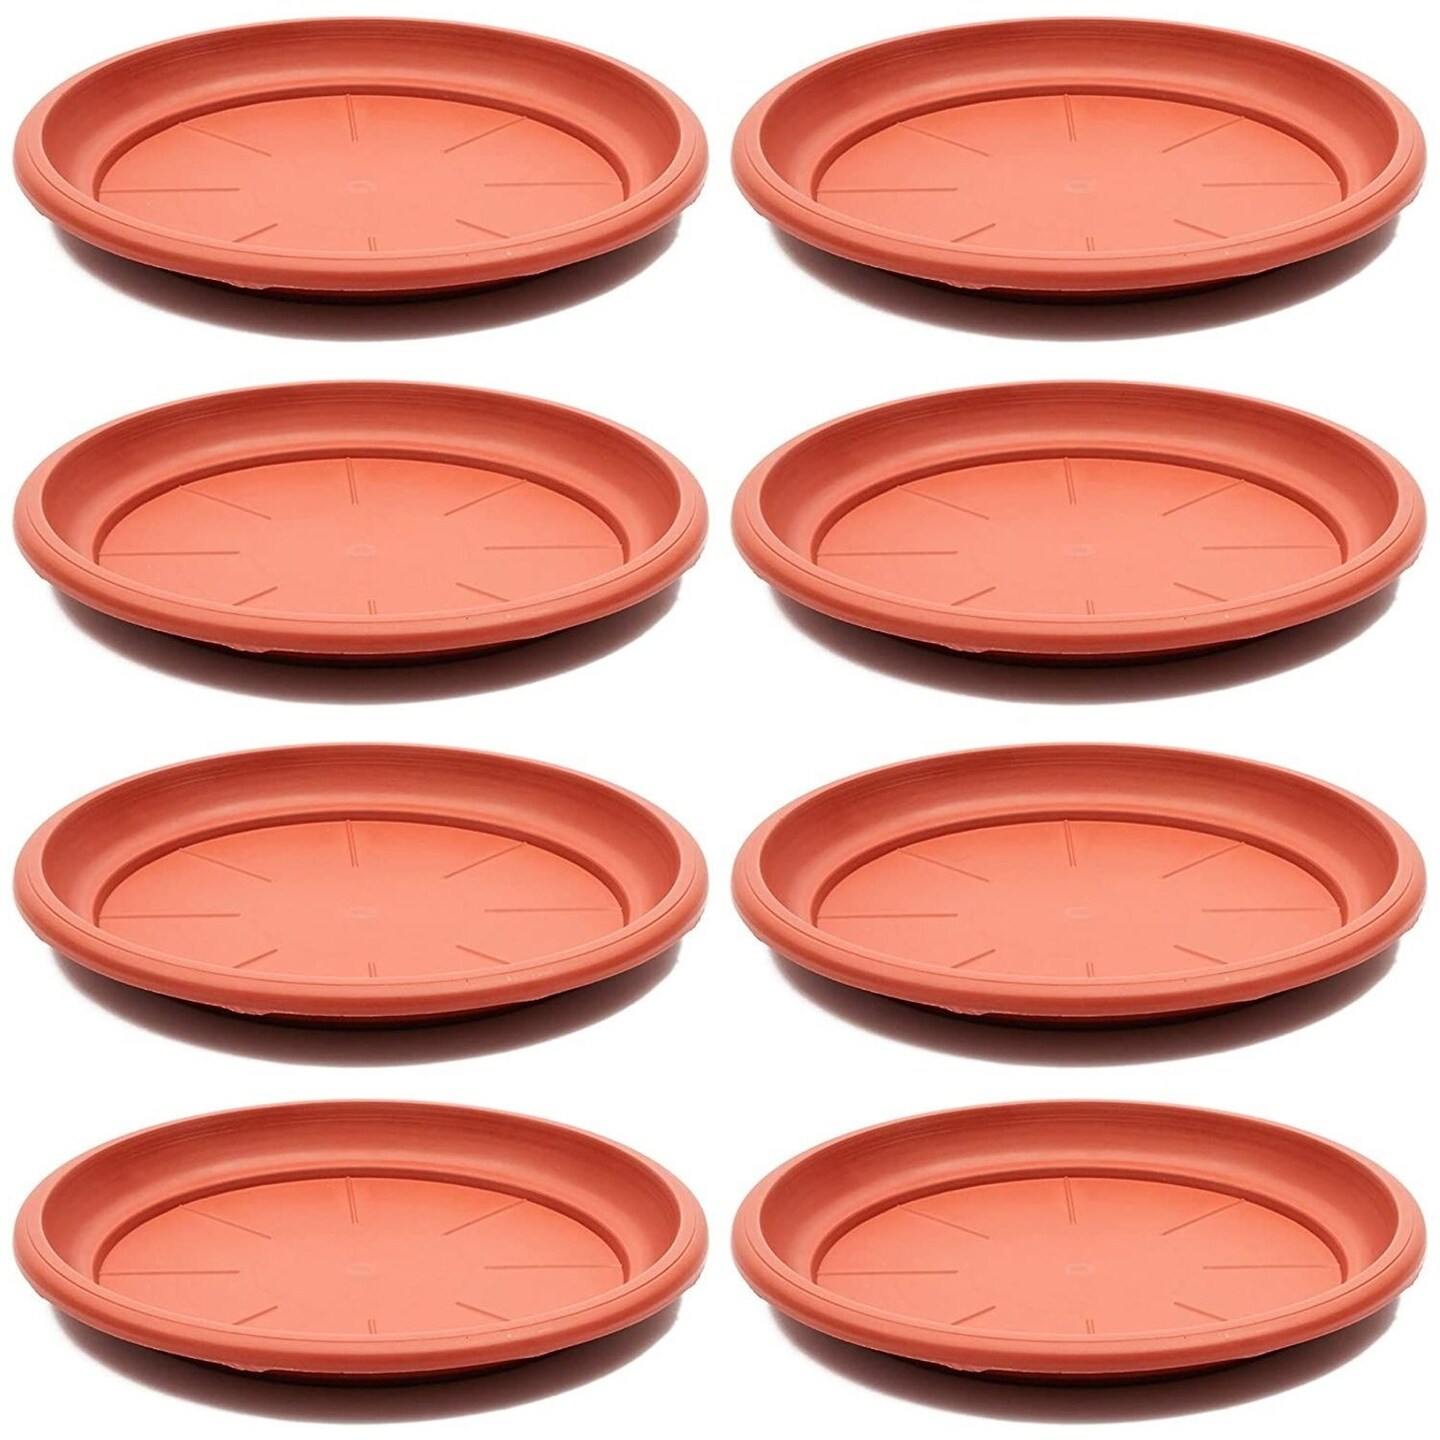 8-Pack Round Plastic Plant Saucer Drip Trays, Terracotta Flower Pot Saucers, Dish for Indoors, Outdoors, Garden, Potted Plants, Home, Patio, Tabletop Planter Base, Terra Cotta Plate Set (12-inch)